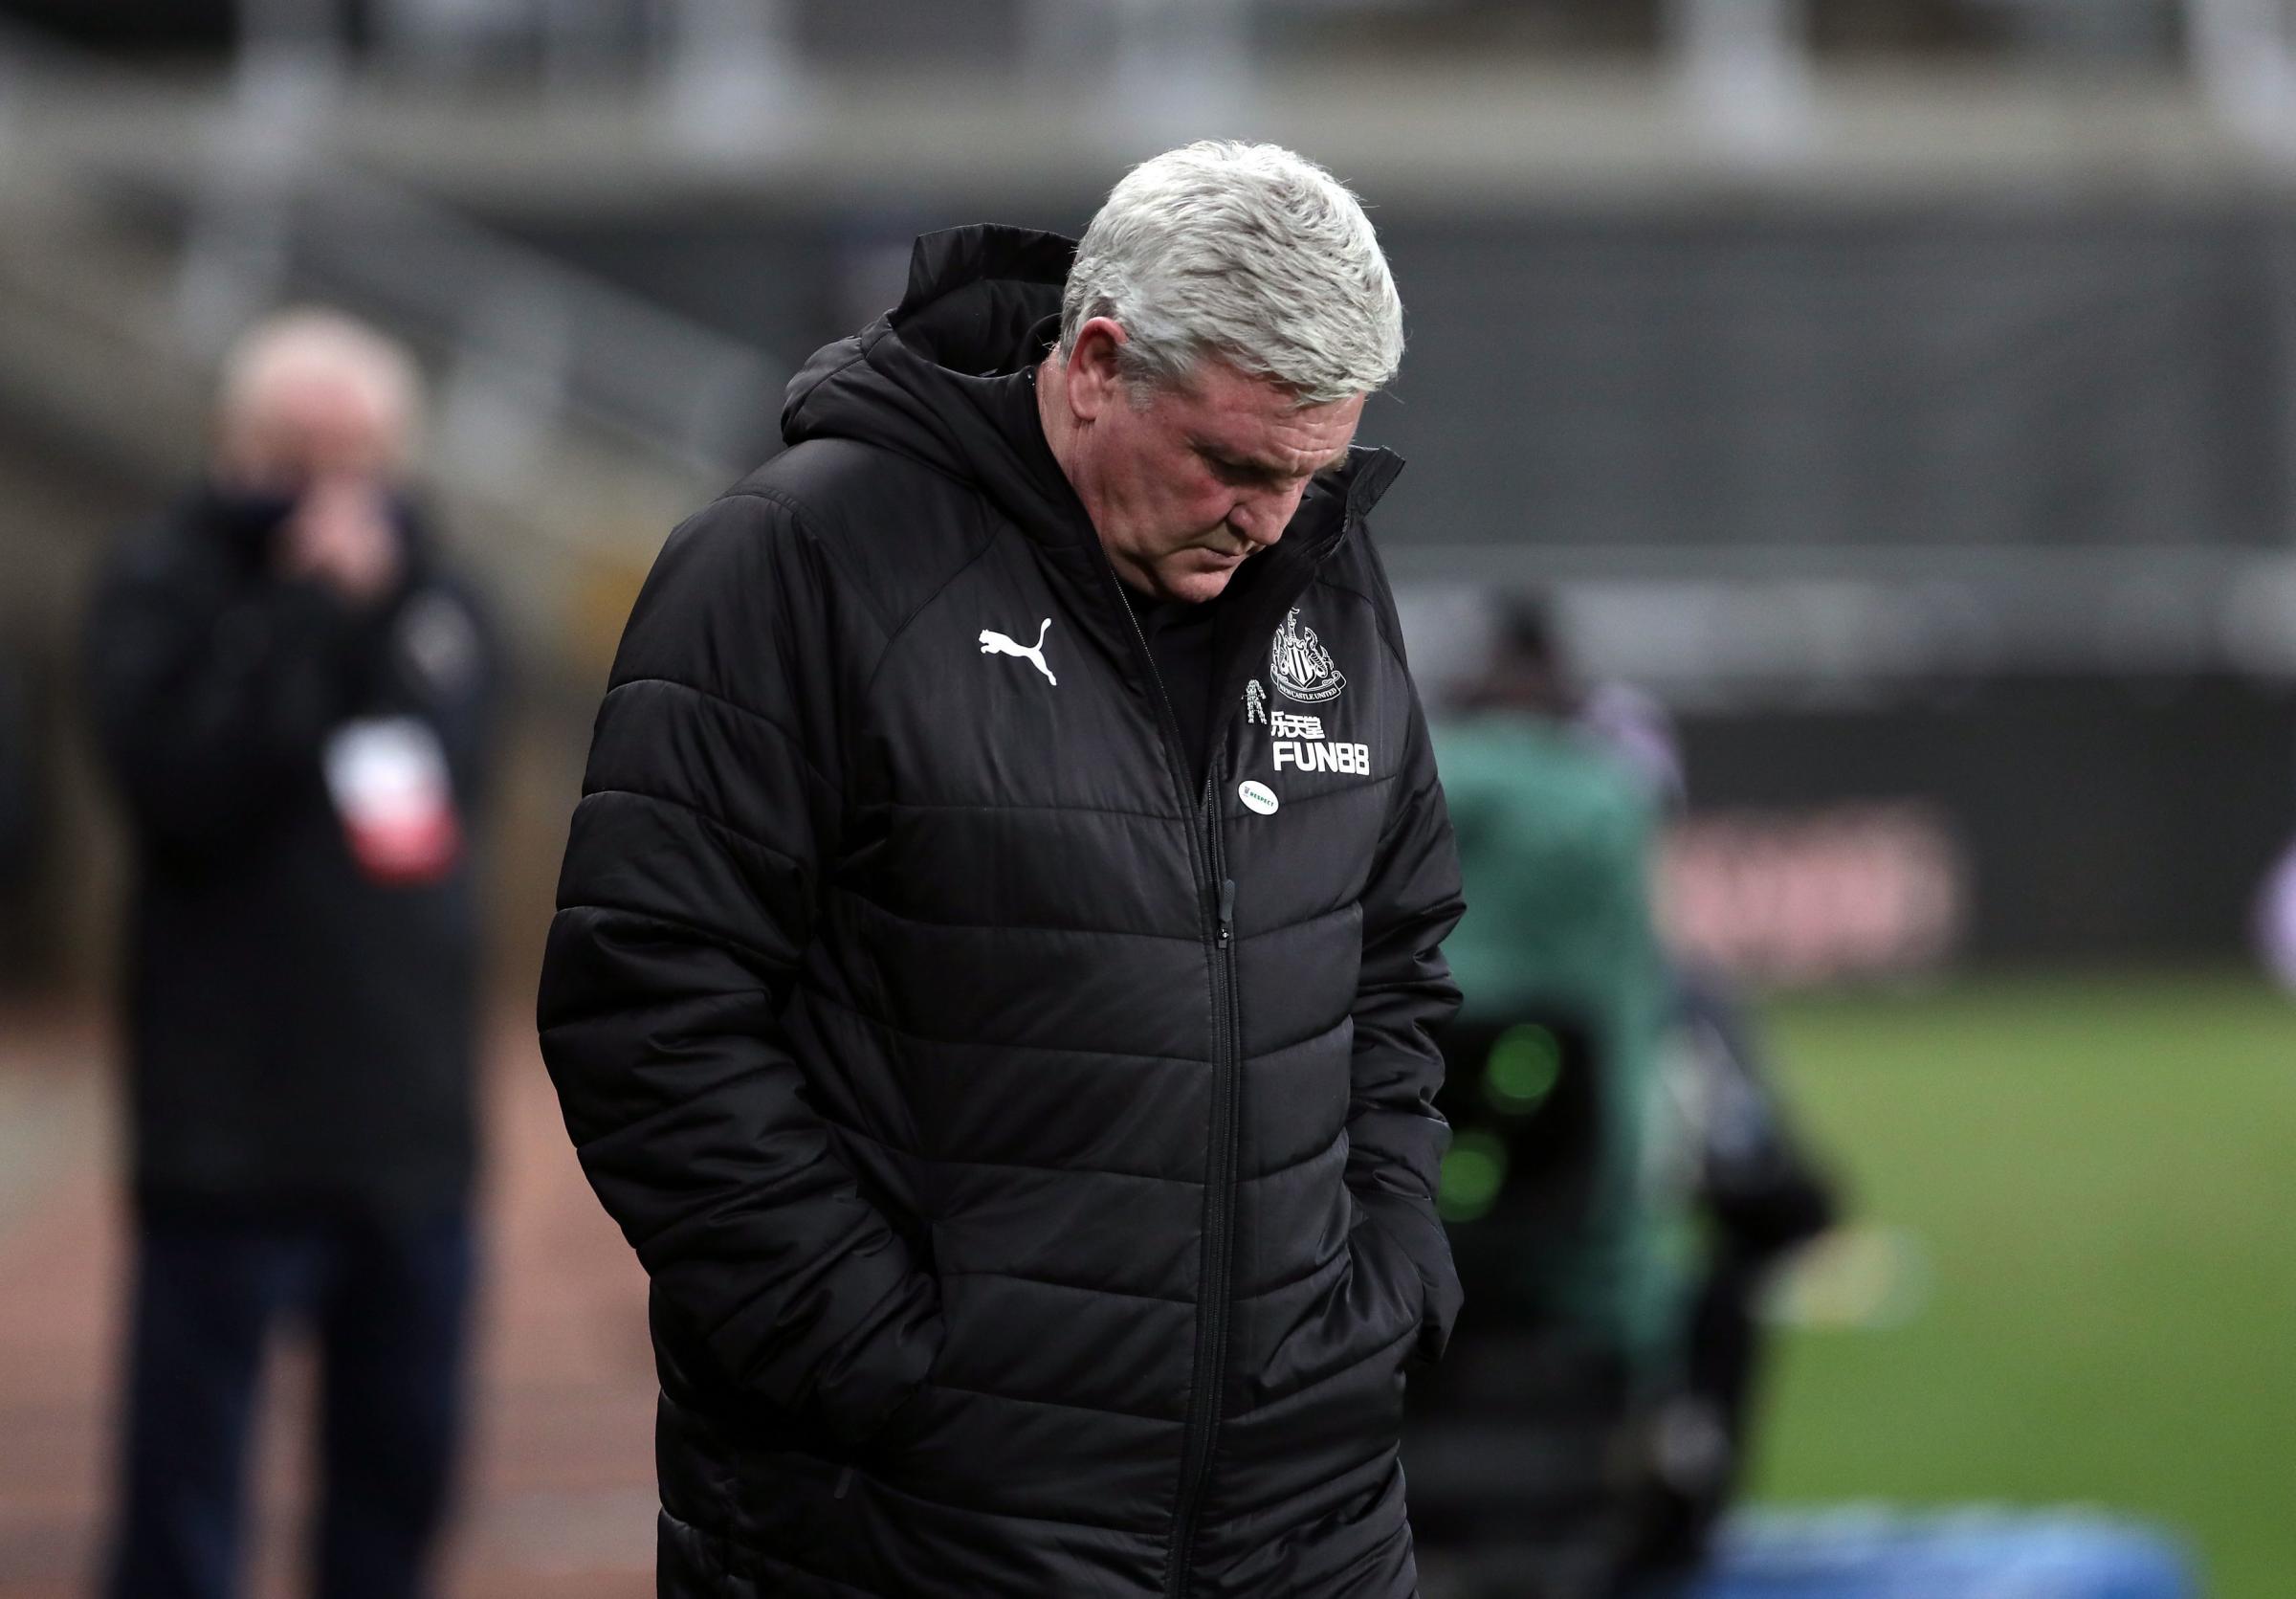 Steve Bruce has fallen out with some key members of his Newcastle squad